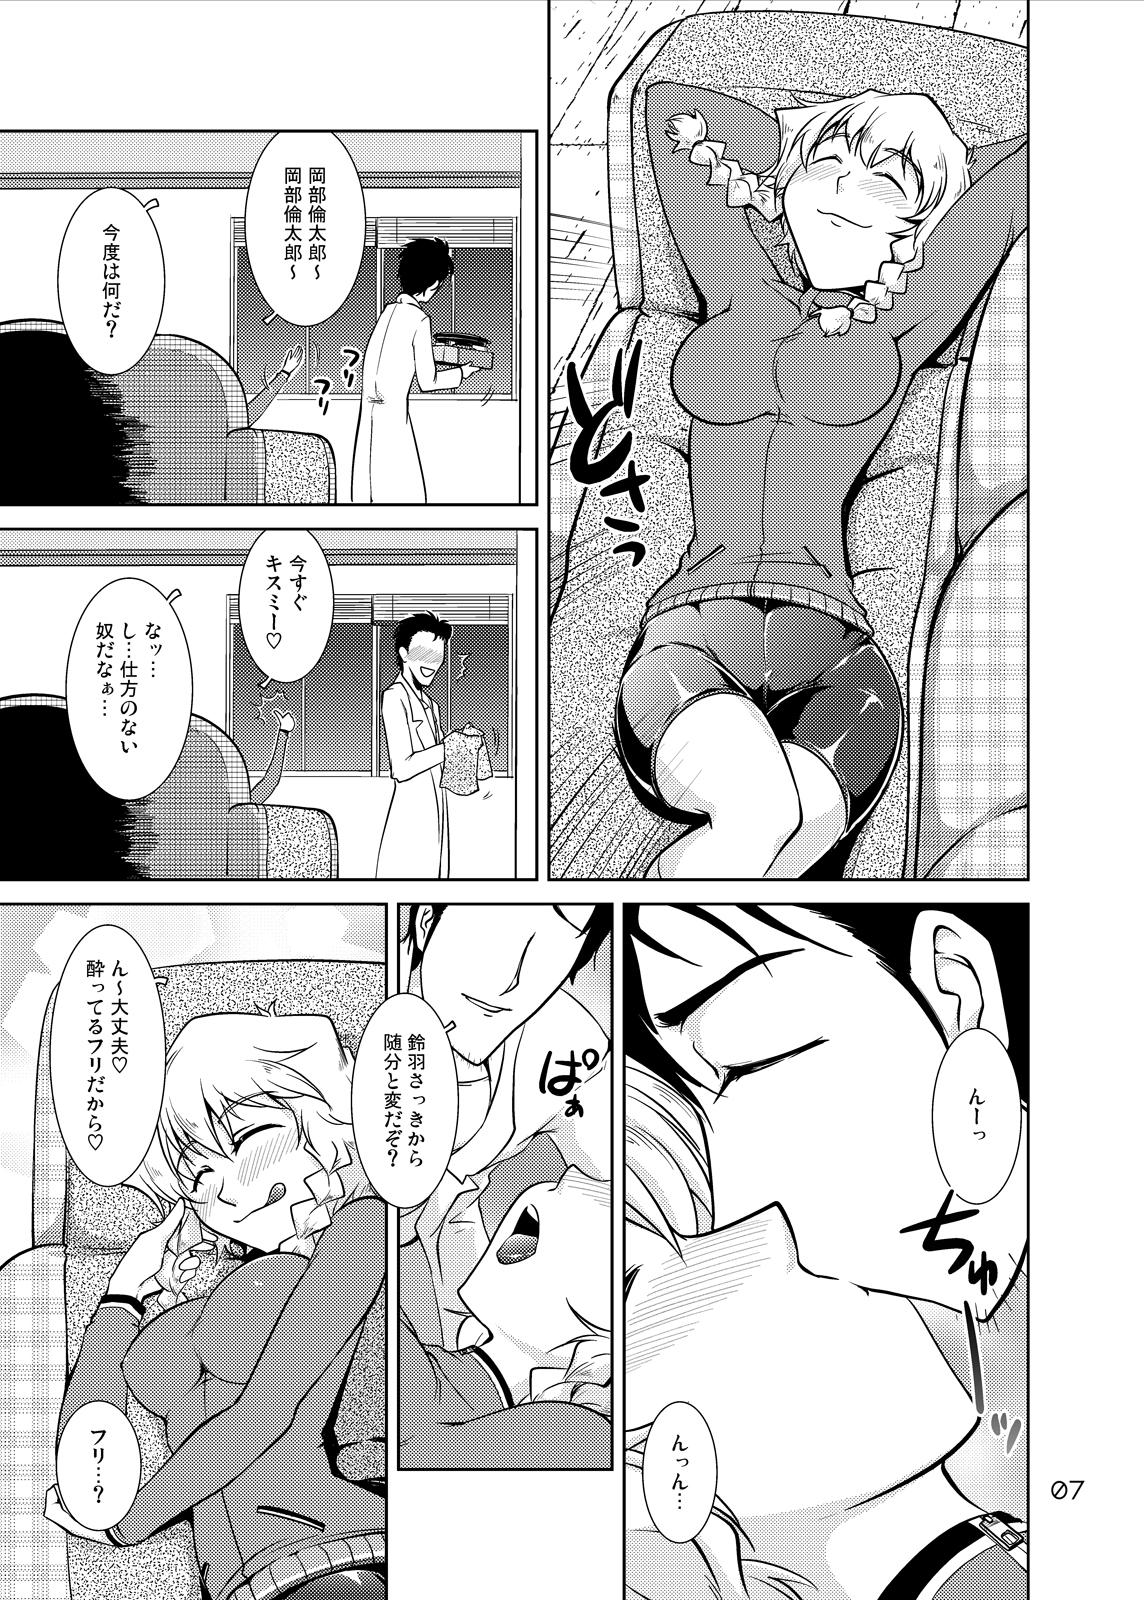 Load Spats;Gate PART6 Pokon's Fatality - Steinsgate Class Room - Page 6